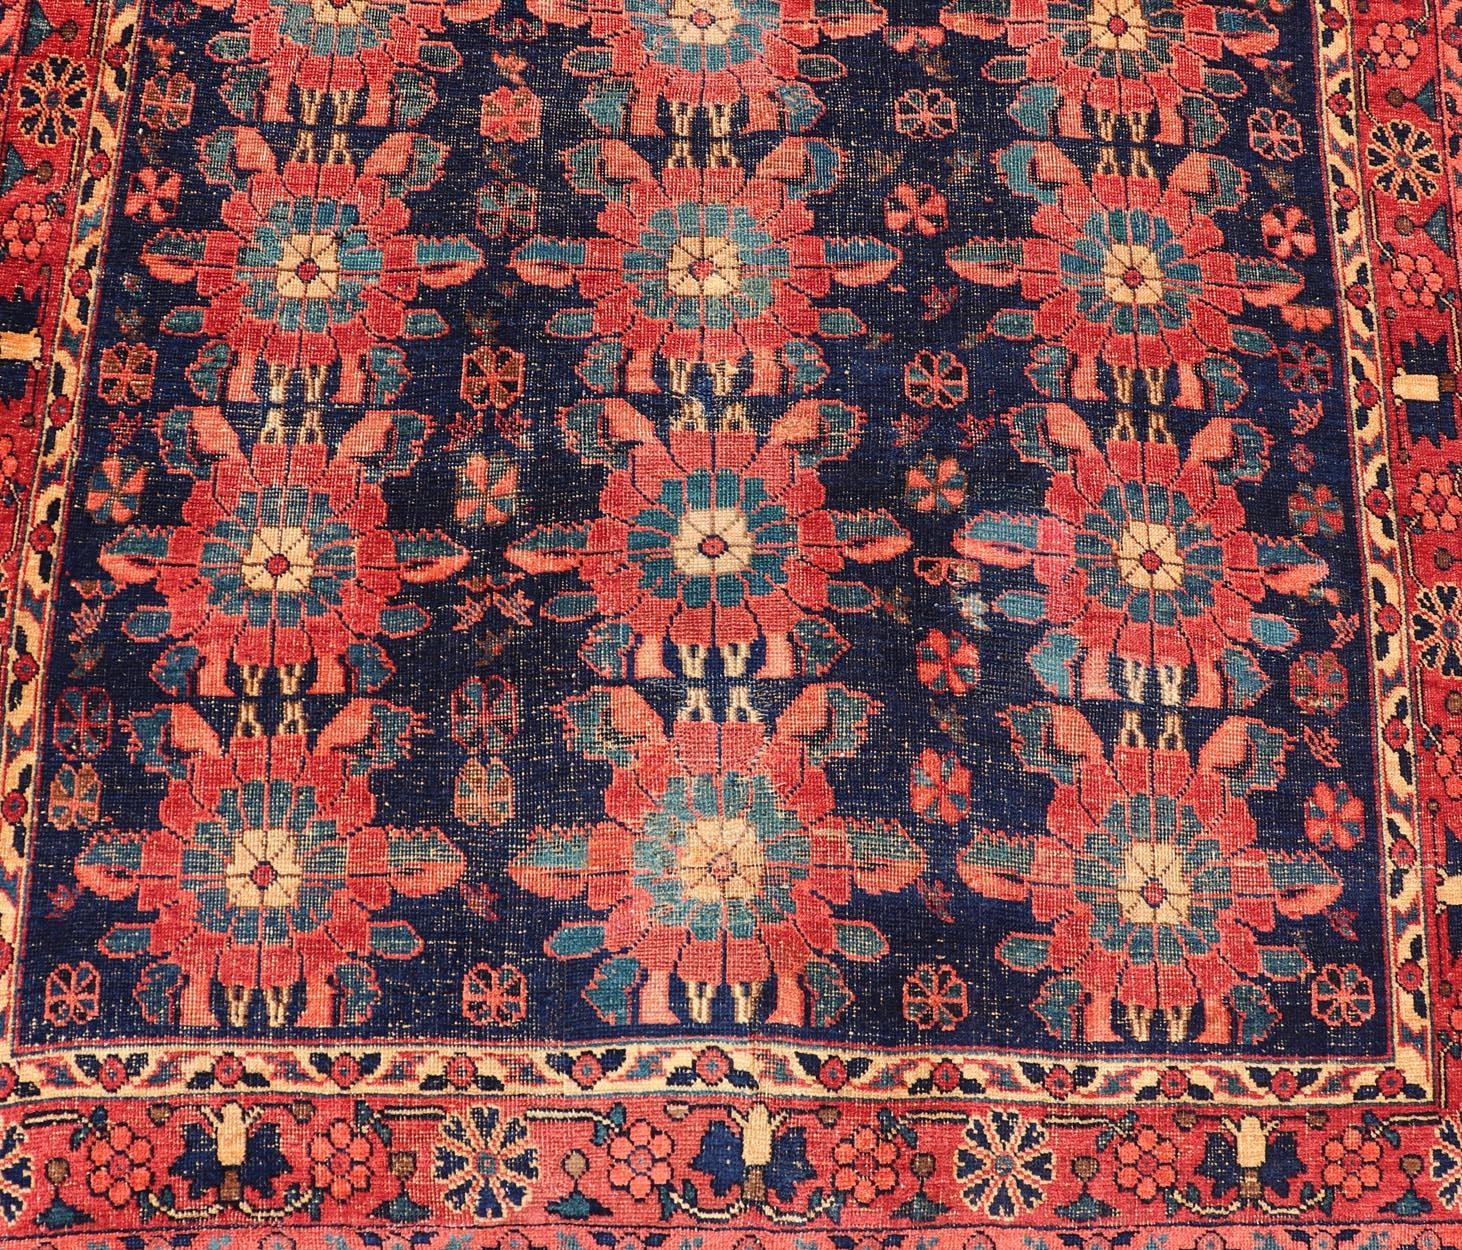 Antique Persian Bidjar Rug with All-Over Floral Motifs in Red and Blue In Good Condition For Sale In Atlanta, GA